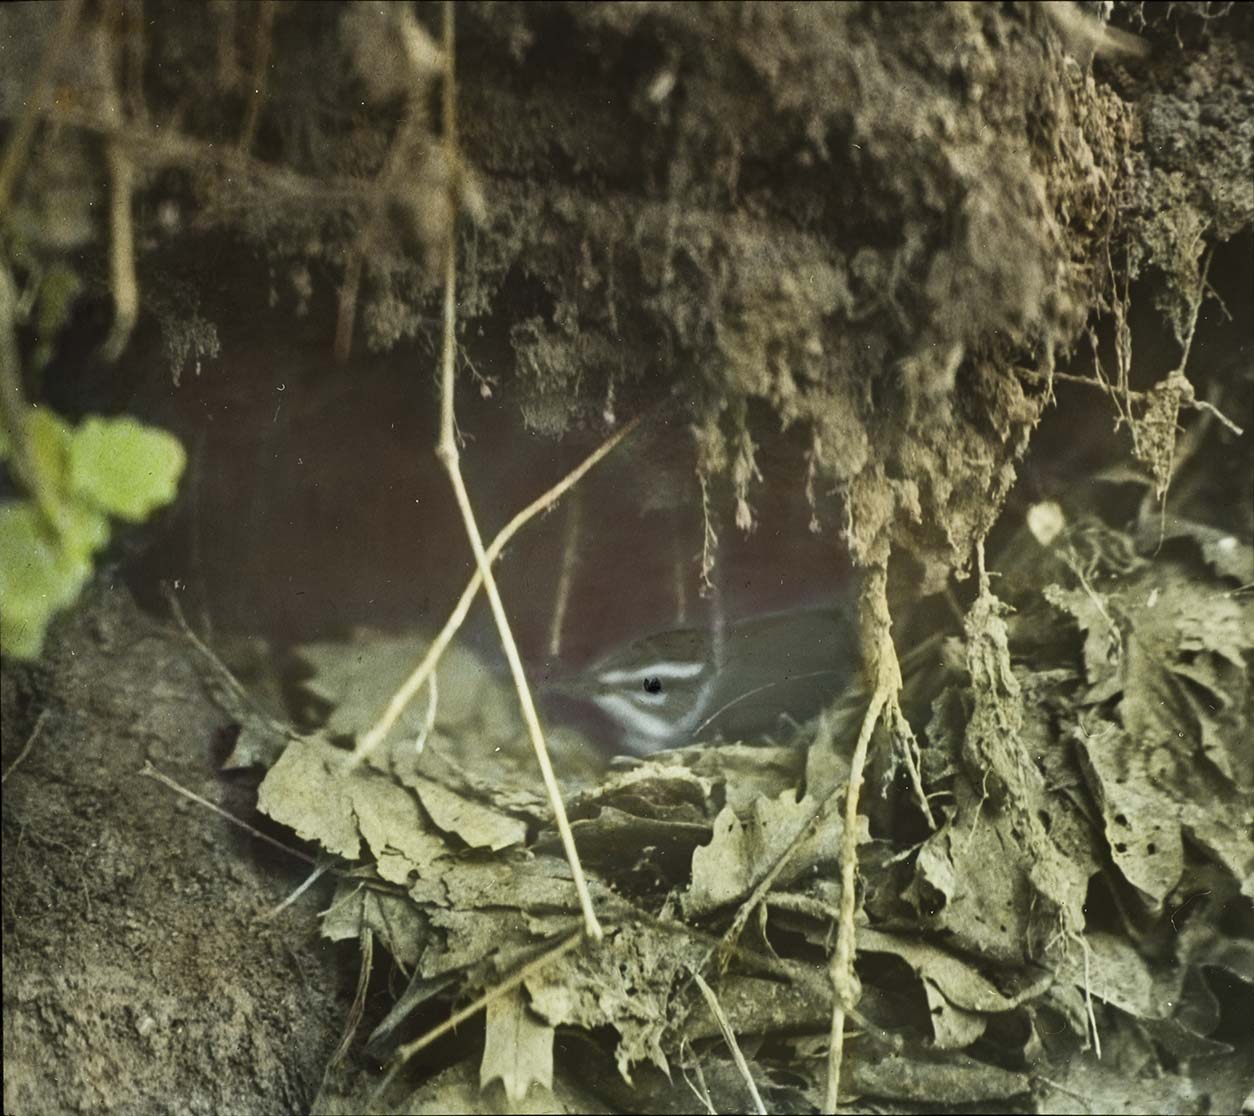 Lantern slide and photograph of a Louisiana Water Thrush sitting on a nest